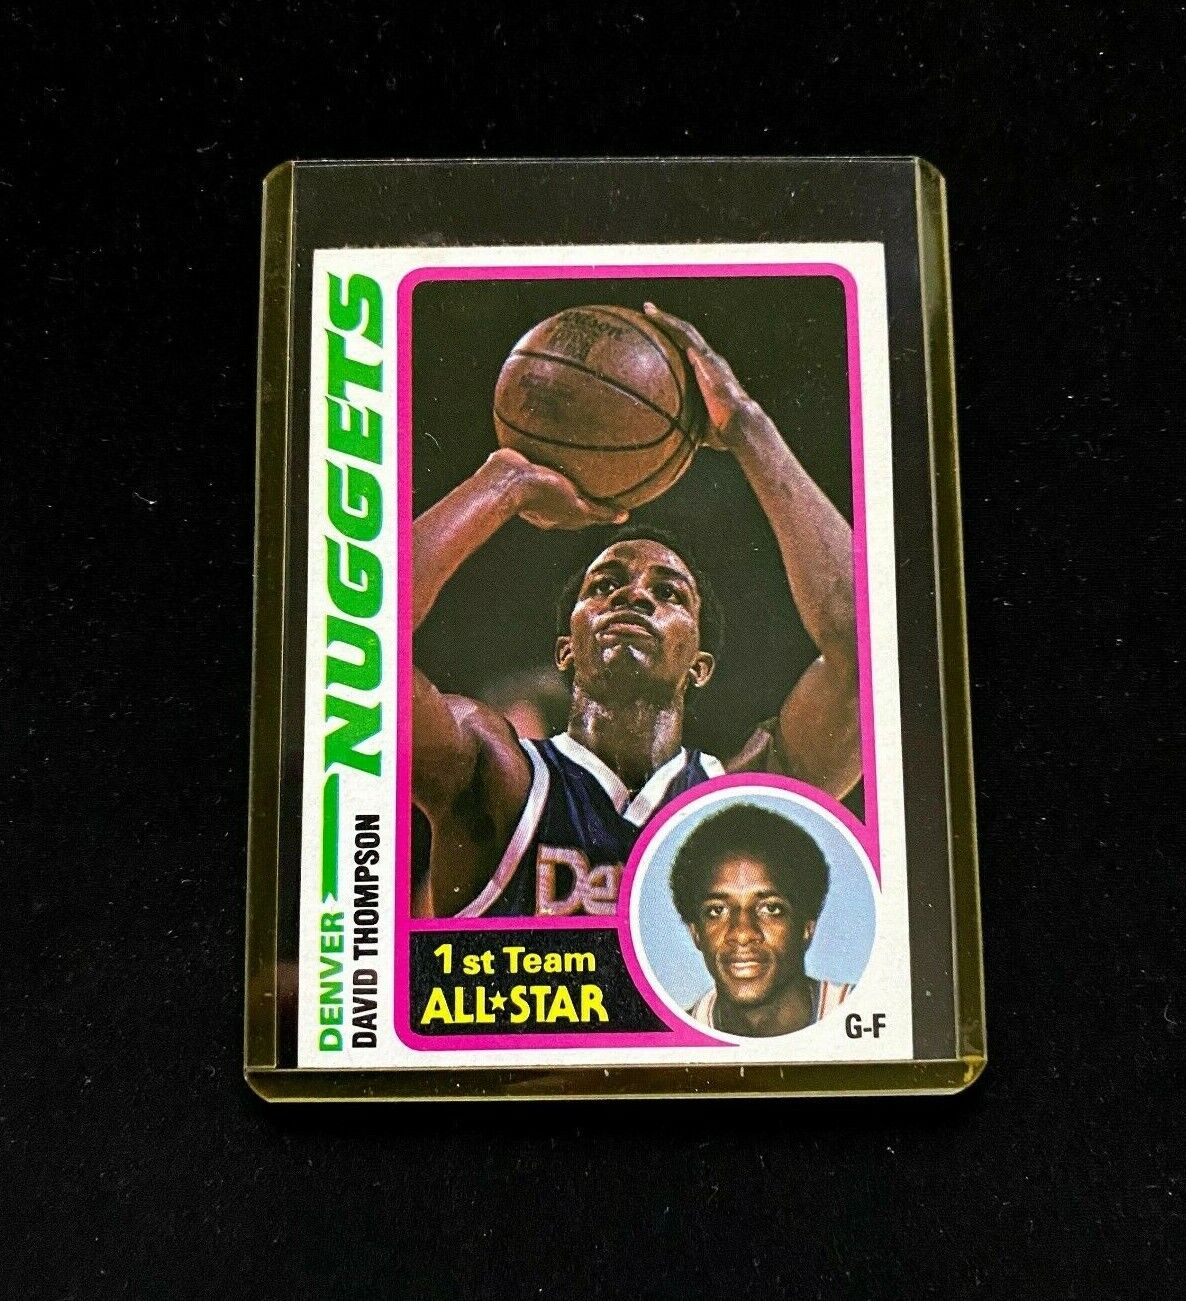 1978 Topps David Thompson Card! (GREAT CONDITION!)